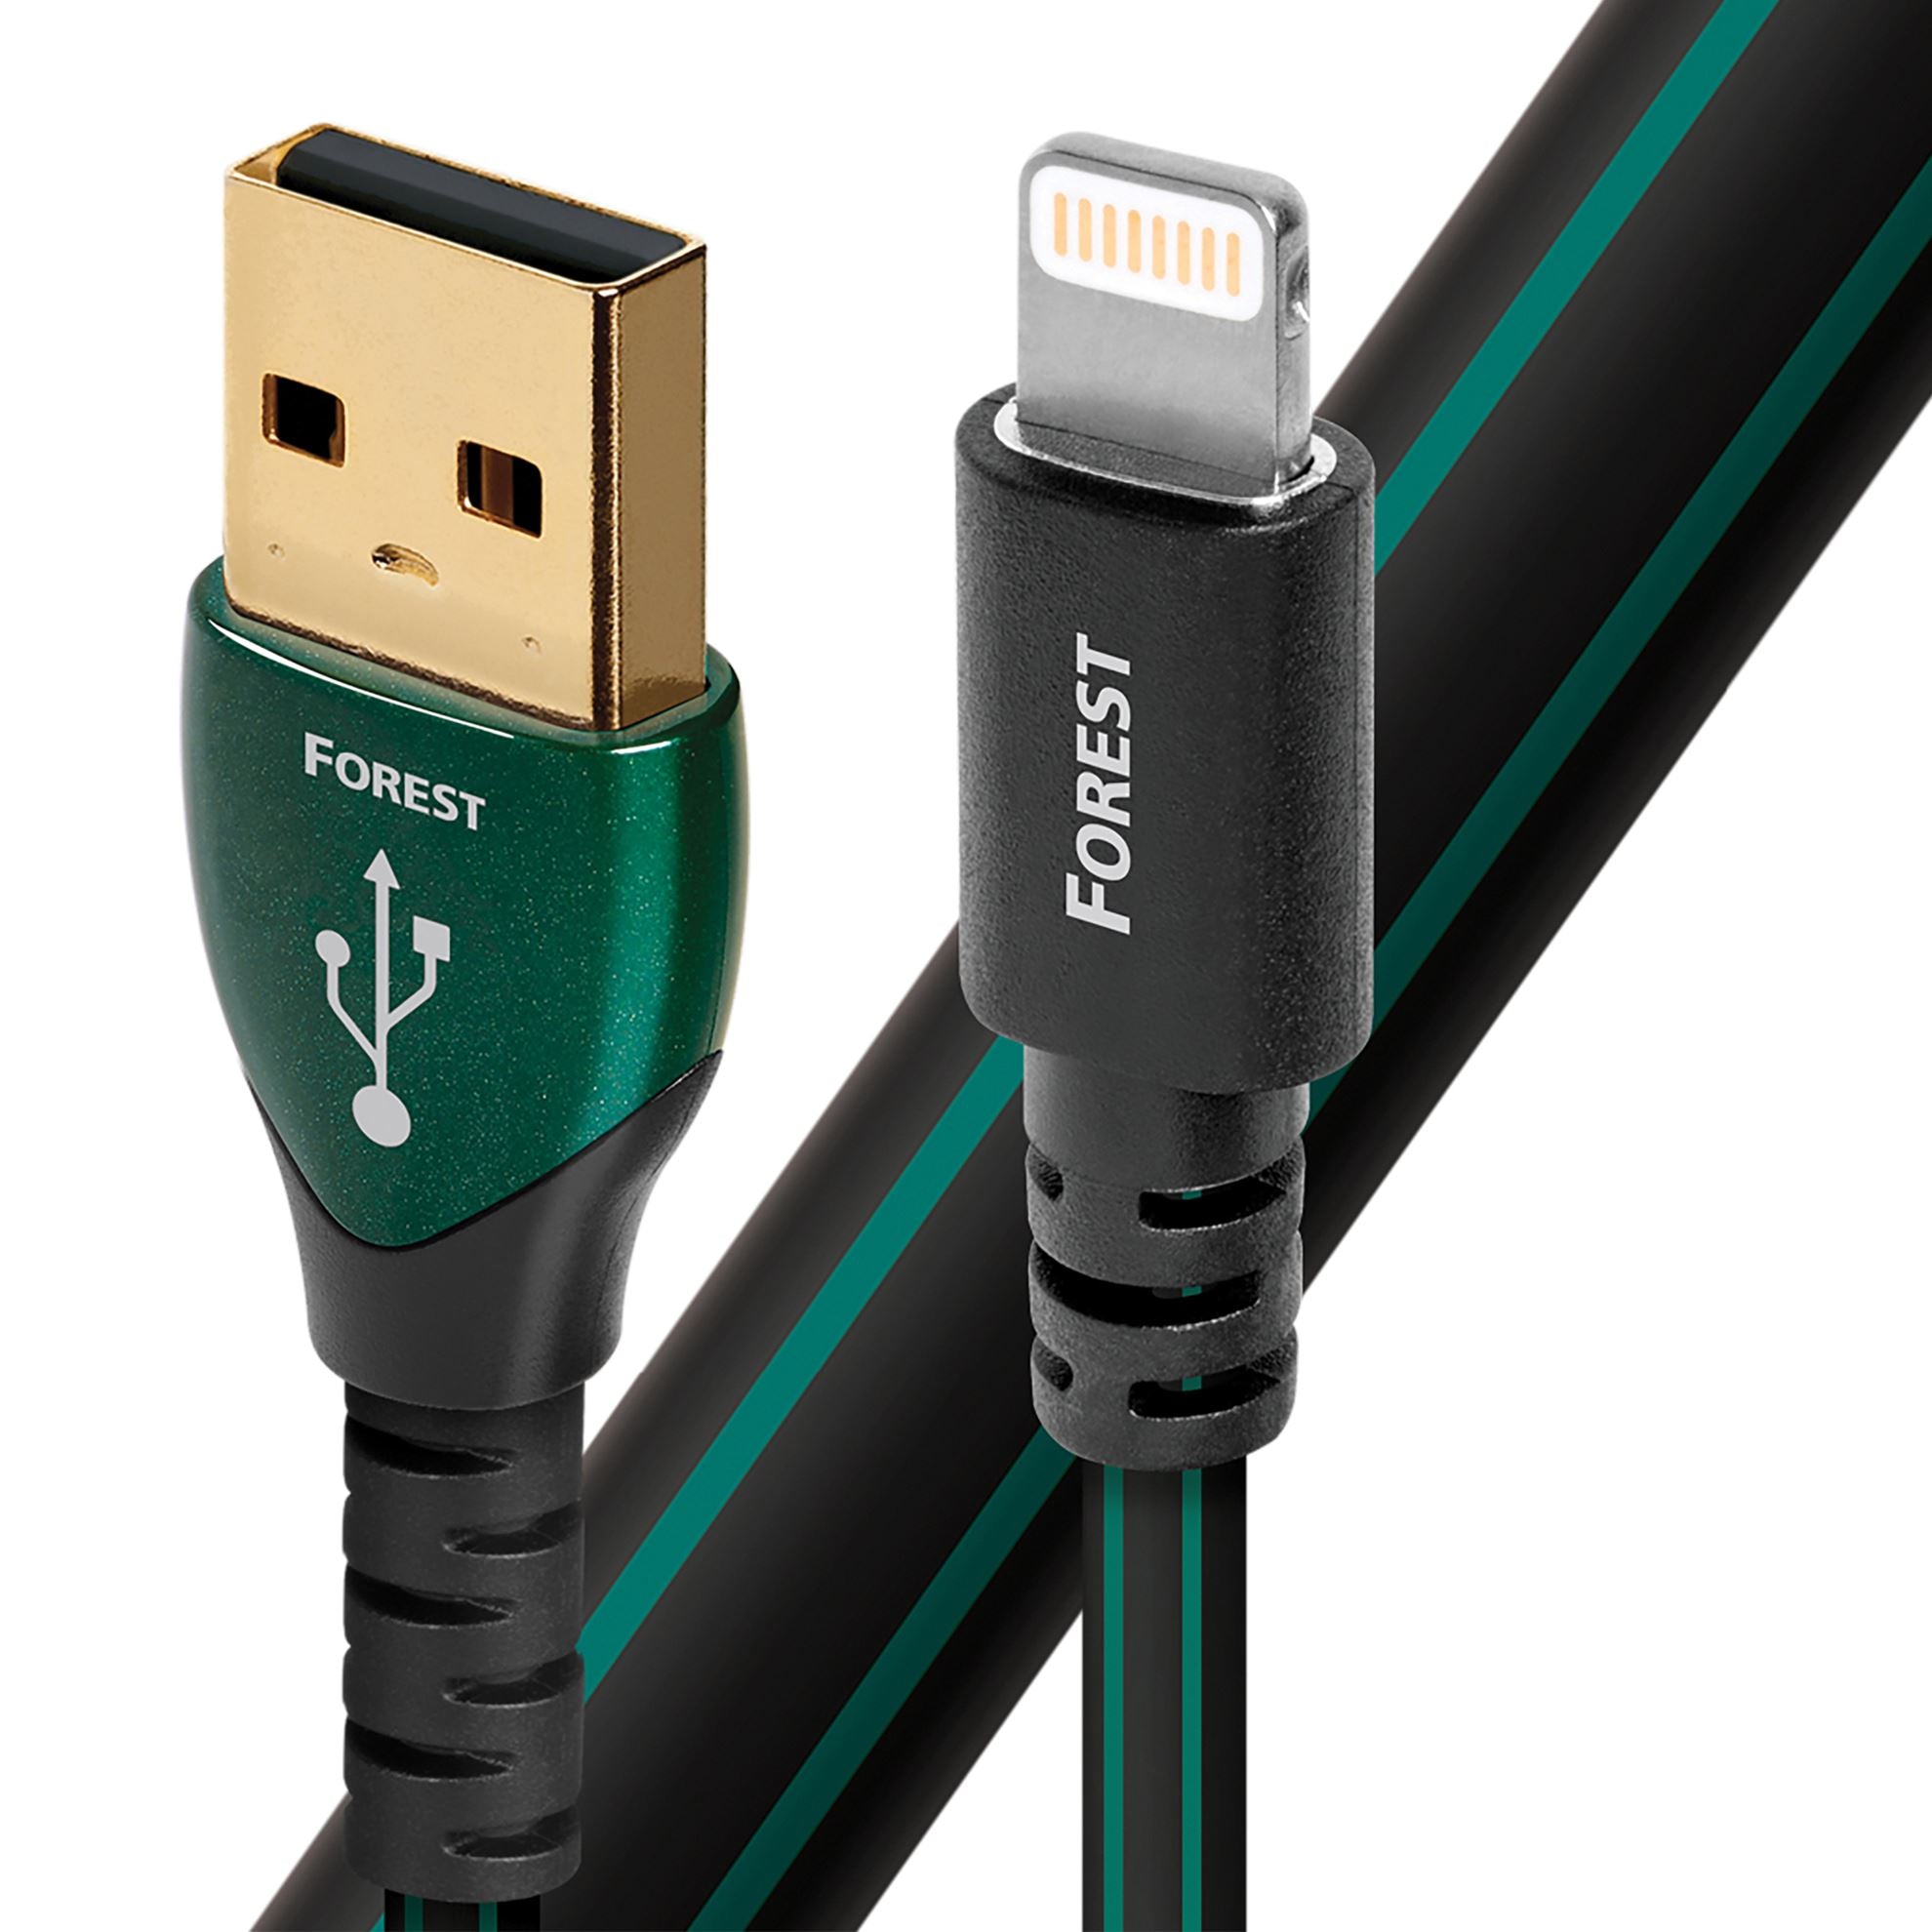 AUDIOQUEST_Forest_.75M_lightning_to_USB2A._O.5%_silver._Hard-cell_foam._Metal-layer_noise_dissipation_Jacket_-_black_PVC_with_green_stripes._0.75M_FOREST_LIGHTNING-USB 1485